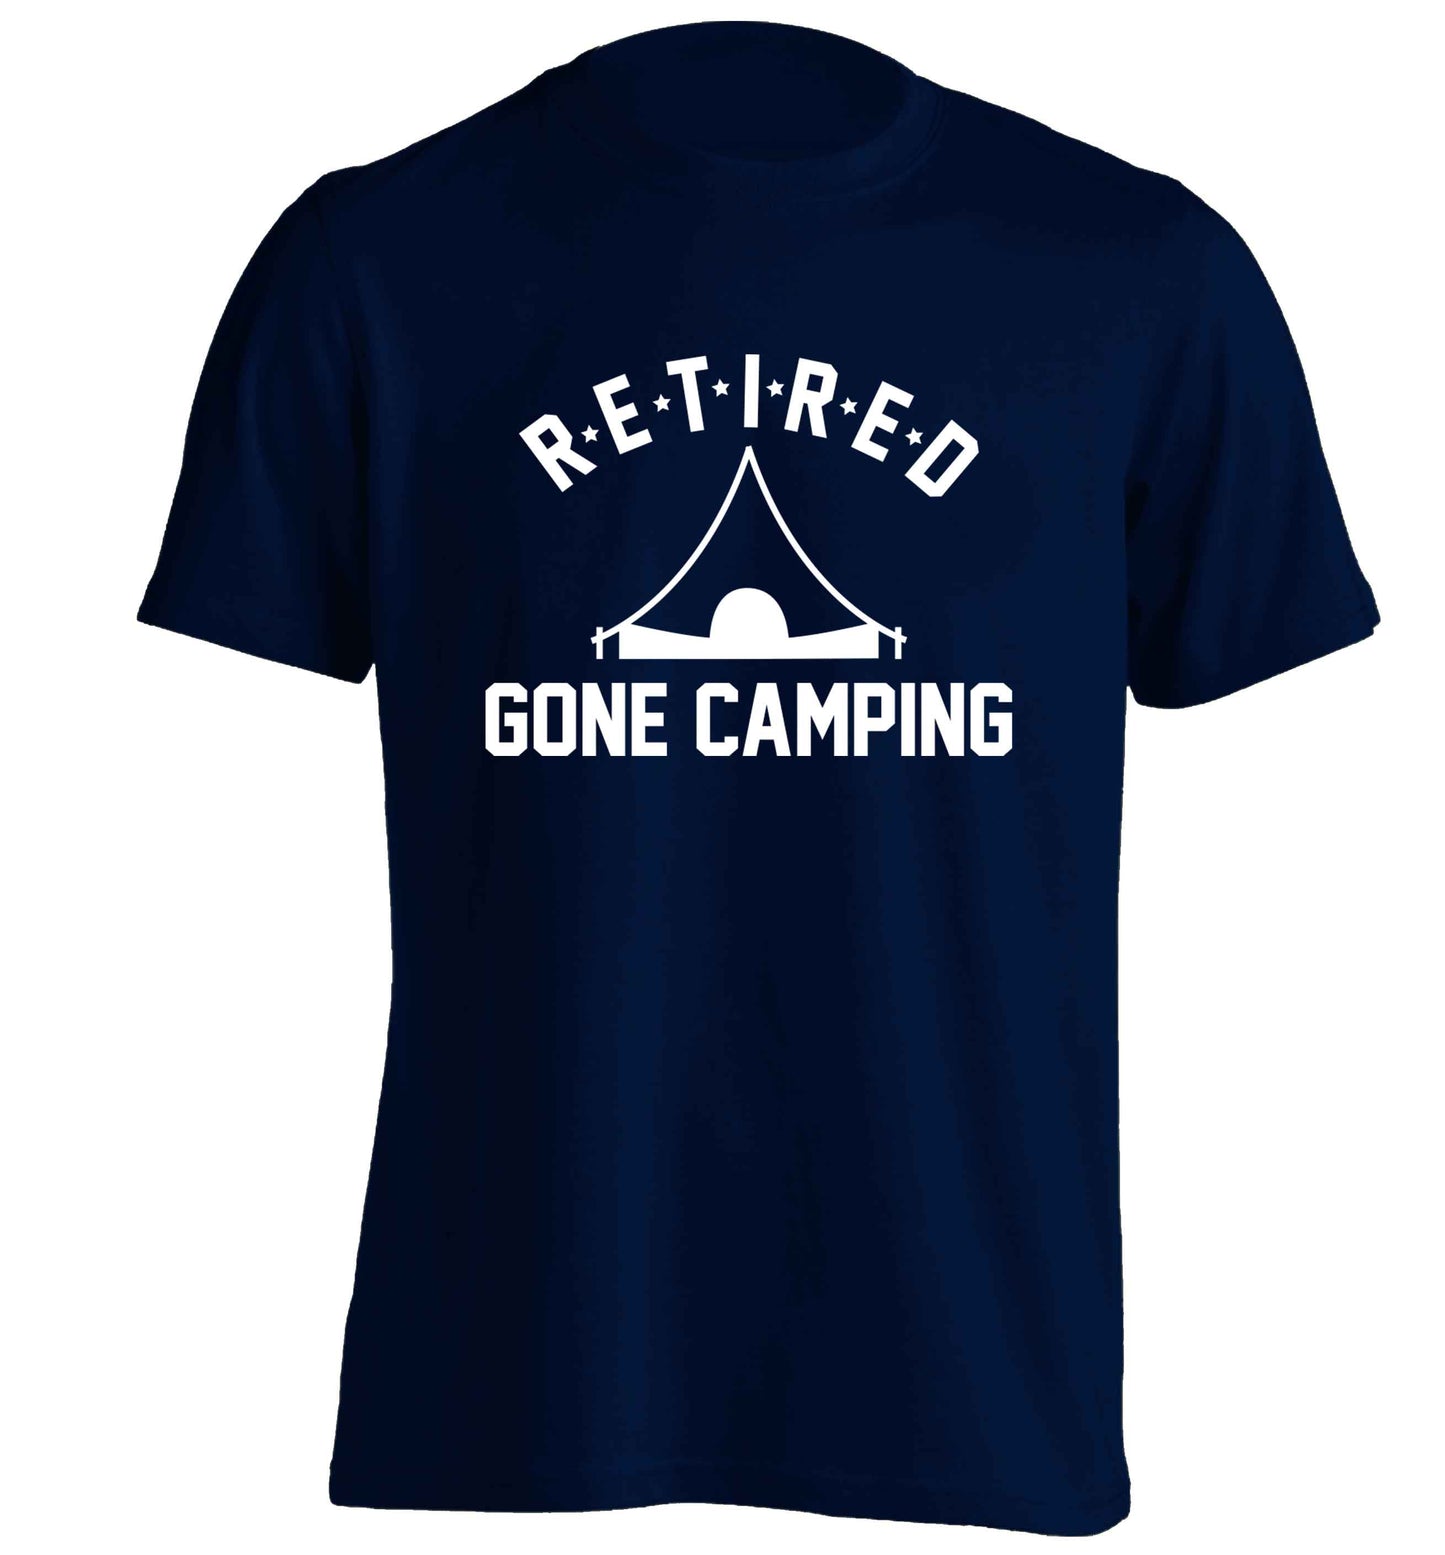 Retired gone camping adults unisex navy Tshirt 2XL